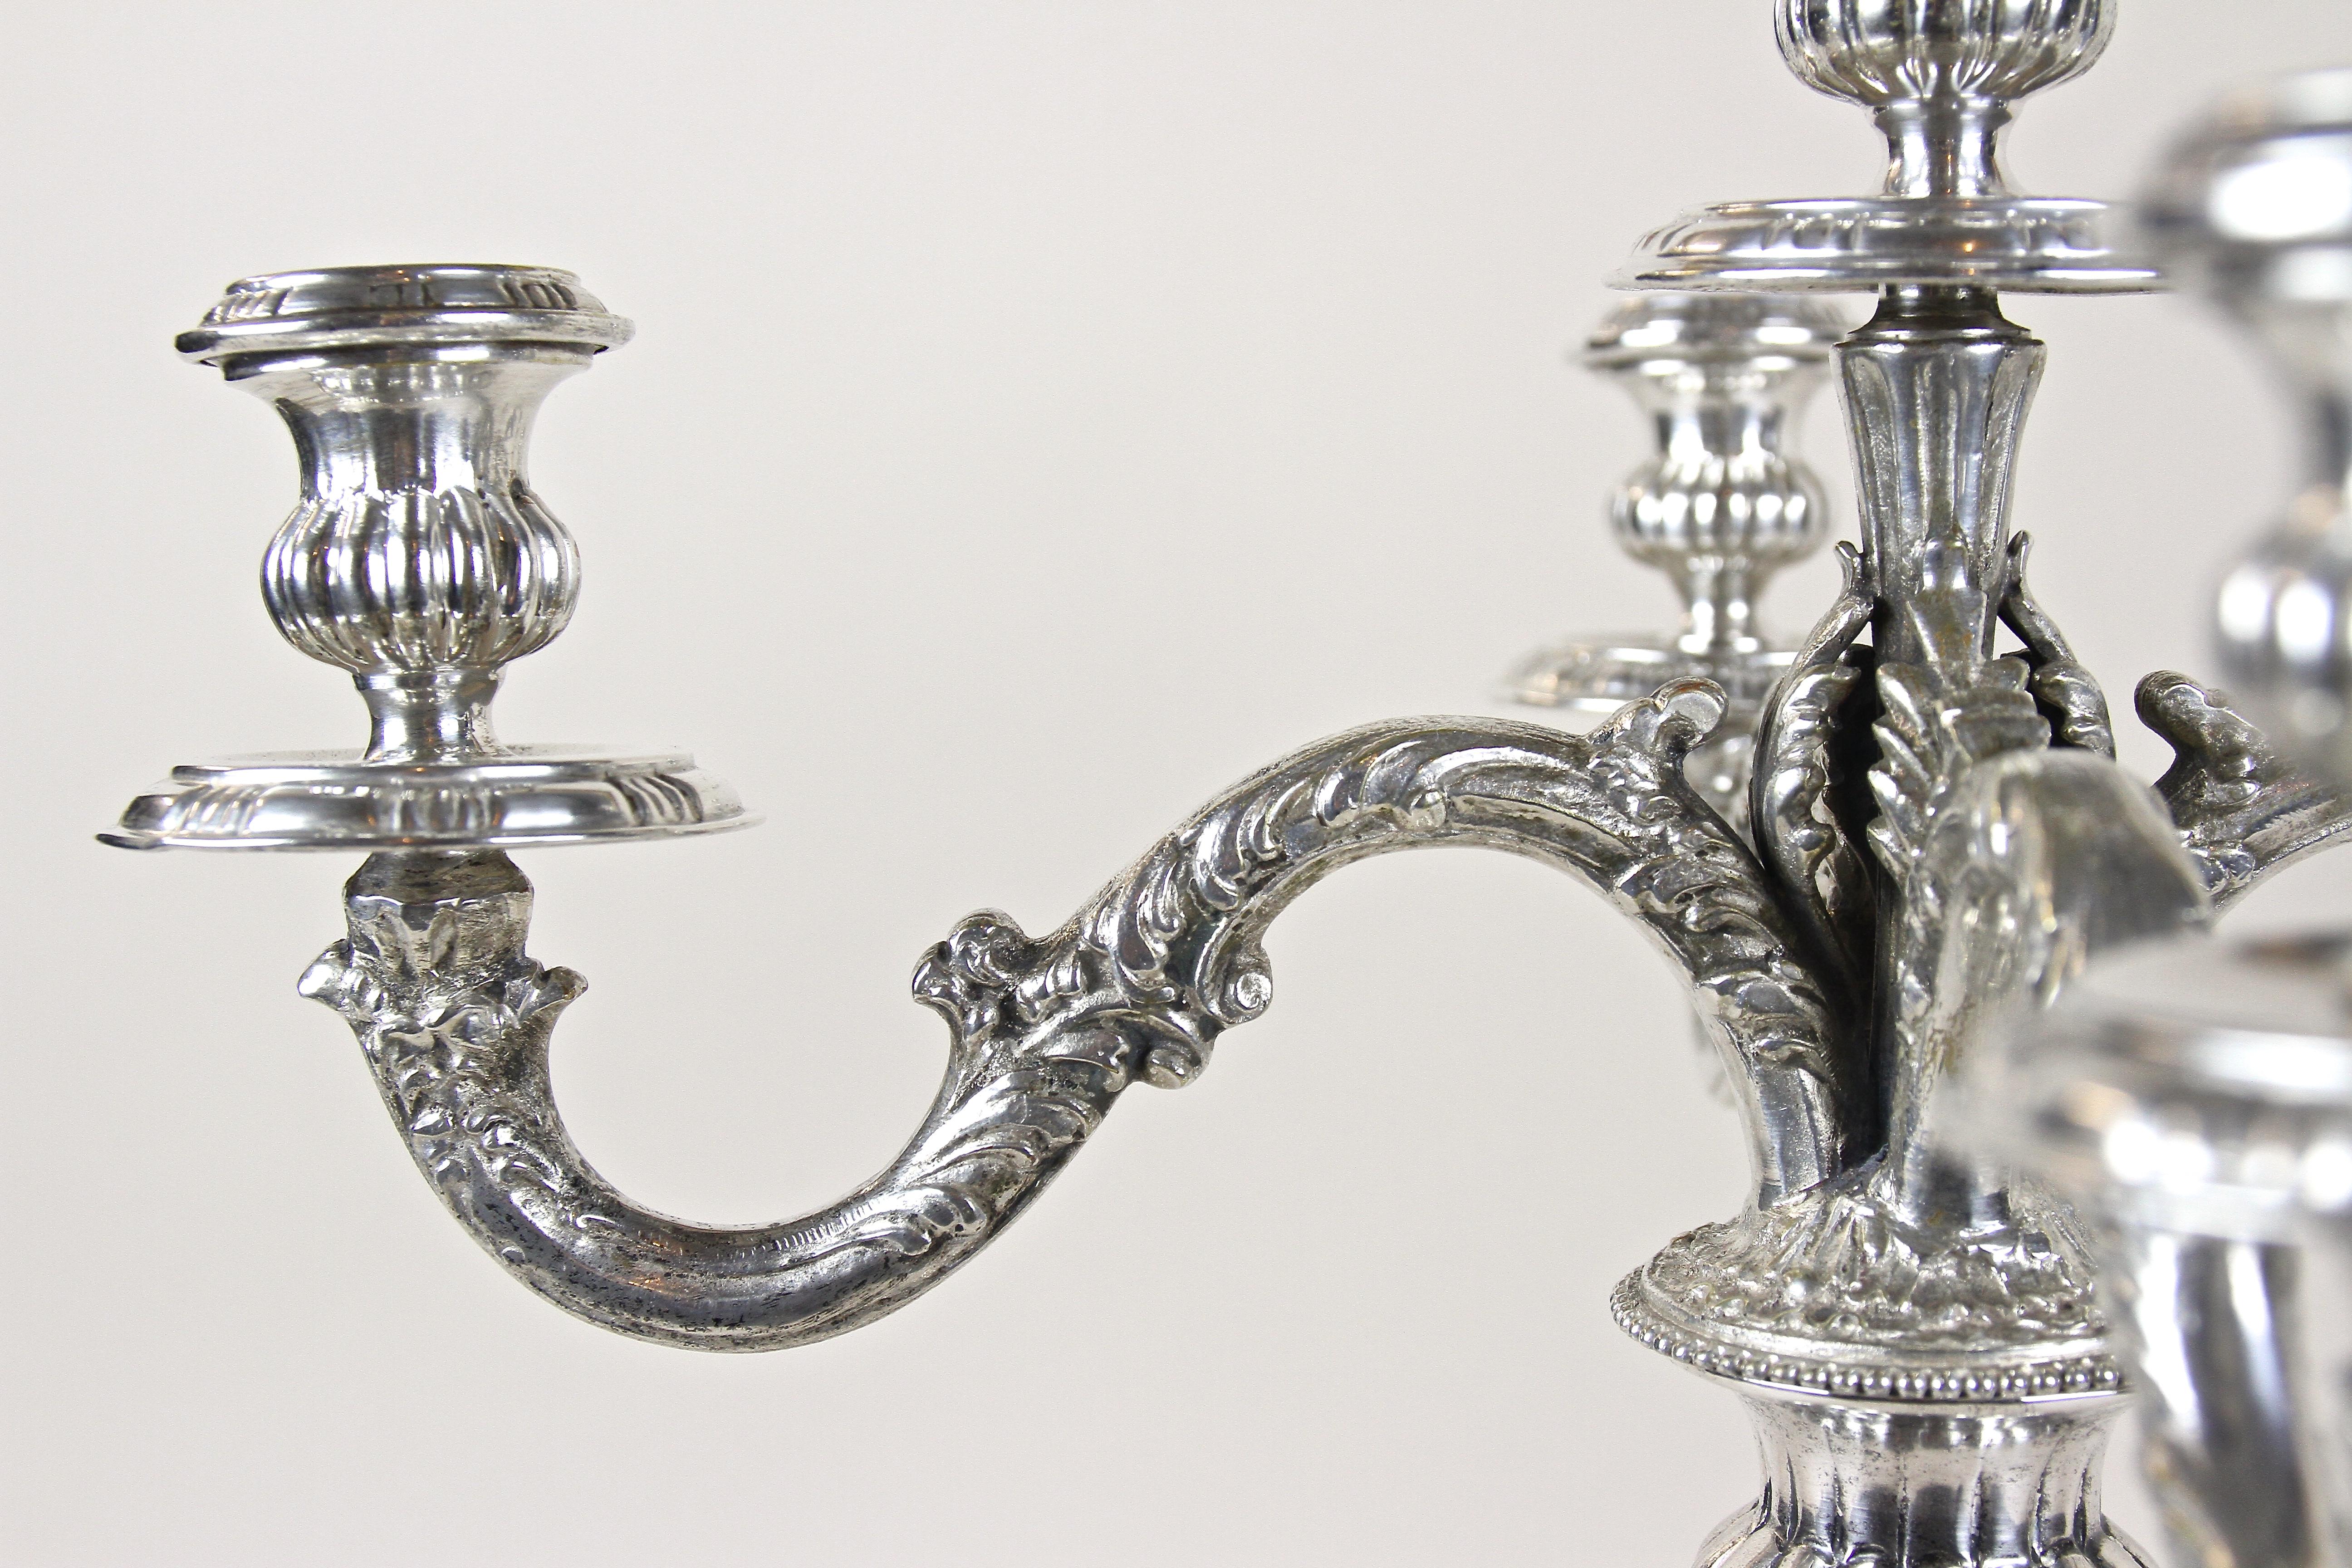 Pair of 19th Century Silvered Candelabras 5-Armed, Austria, circa 1860 For Sale 12